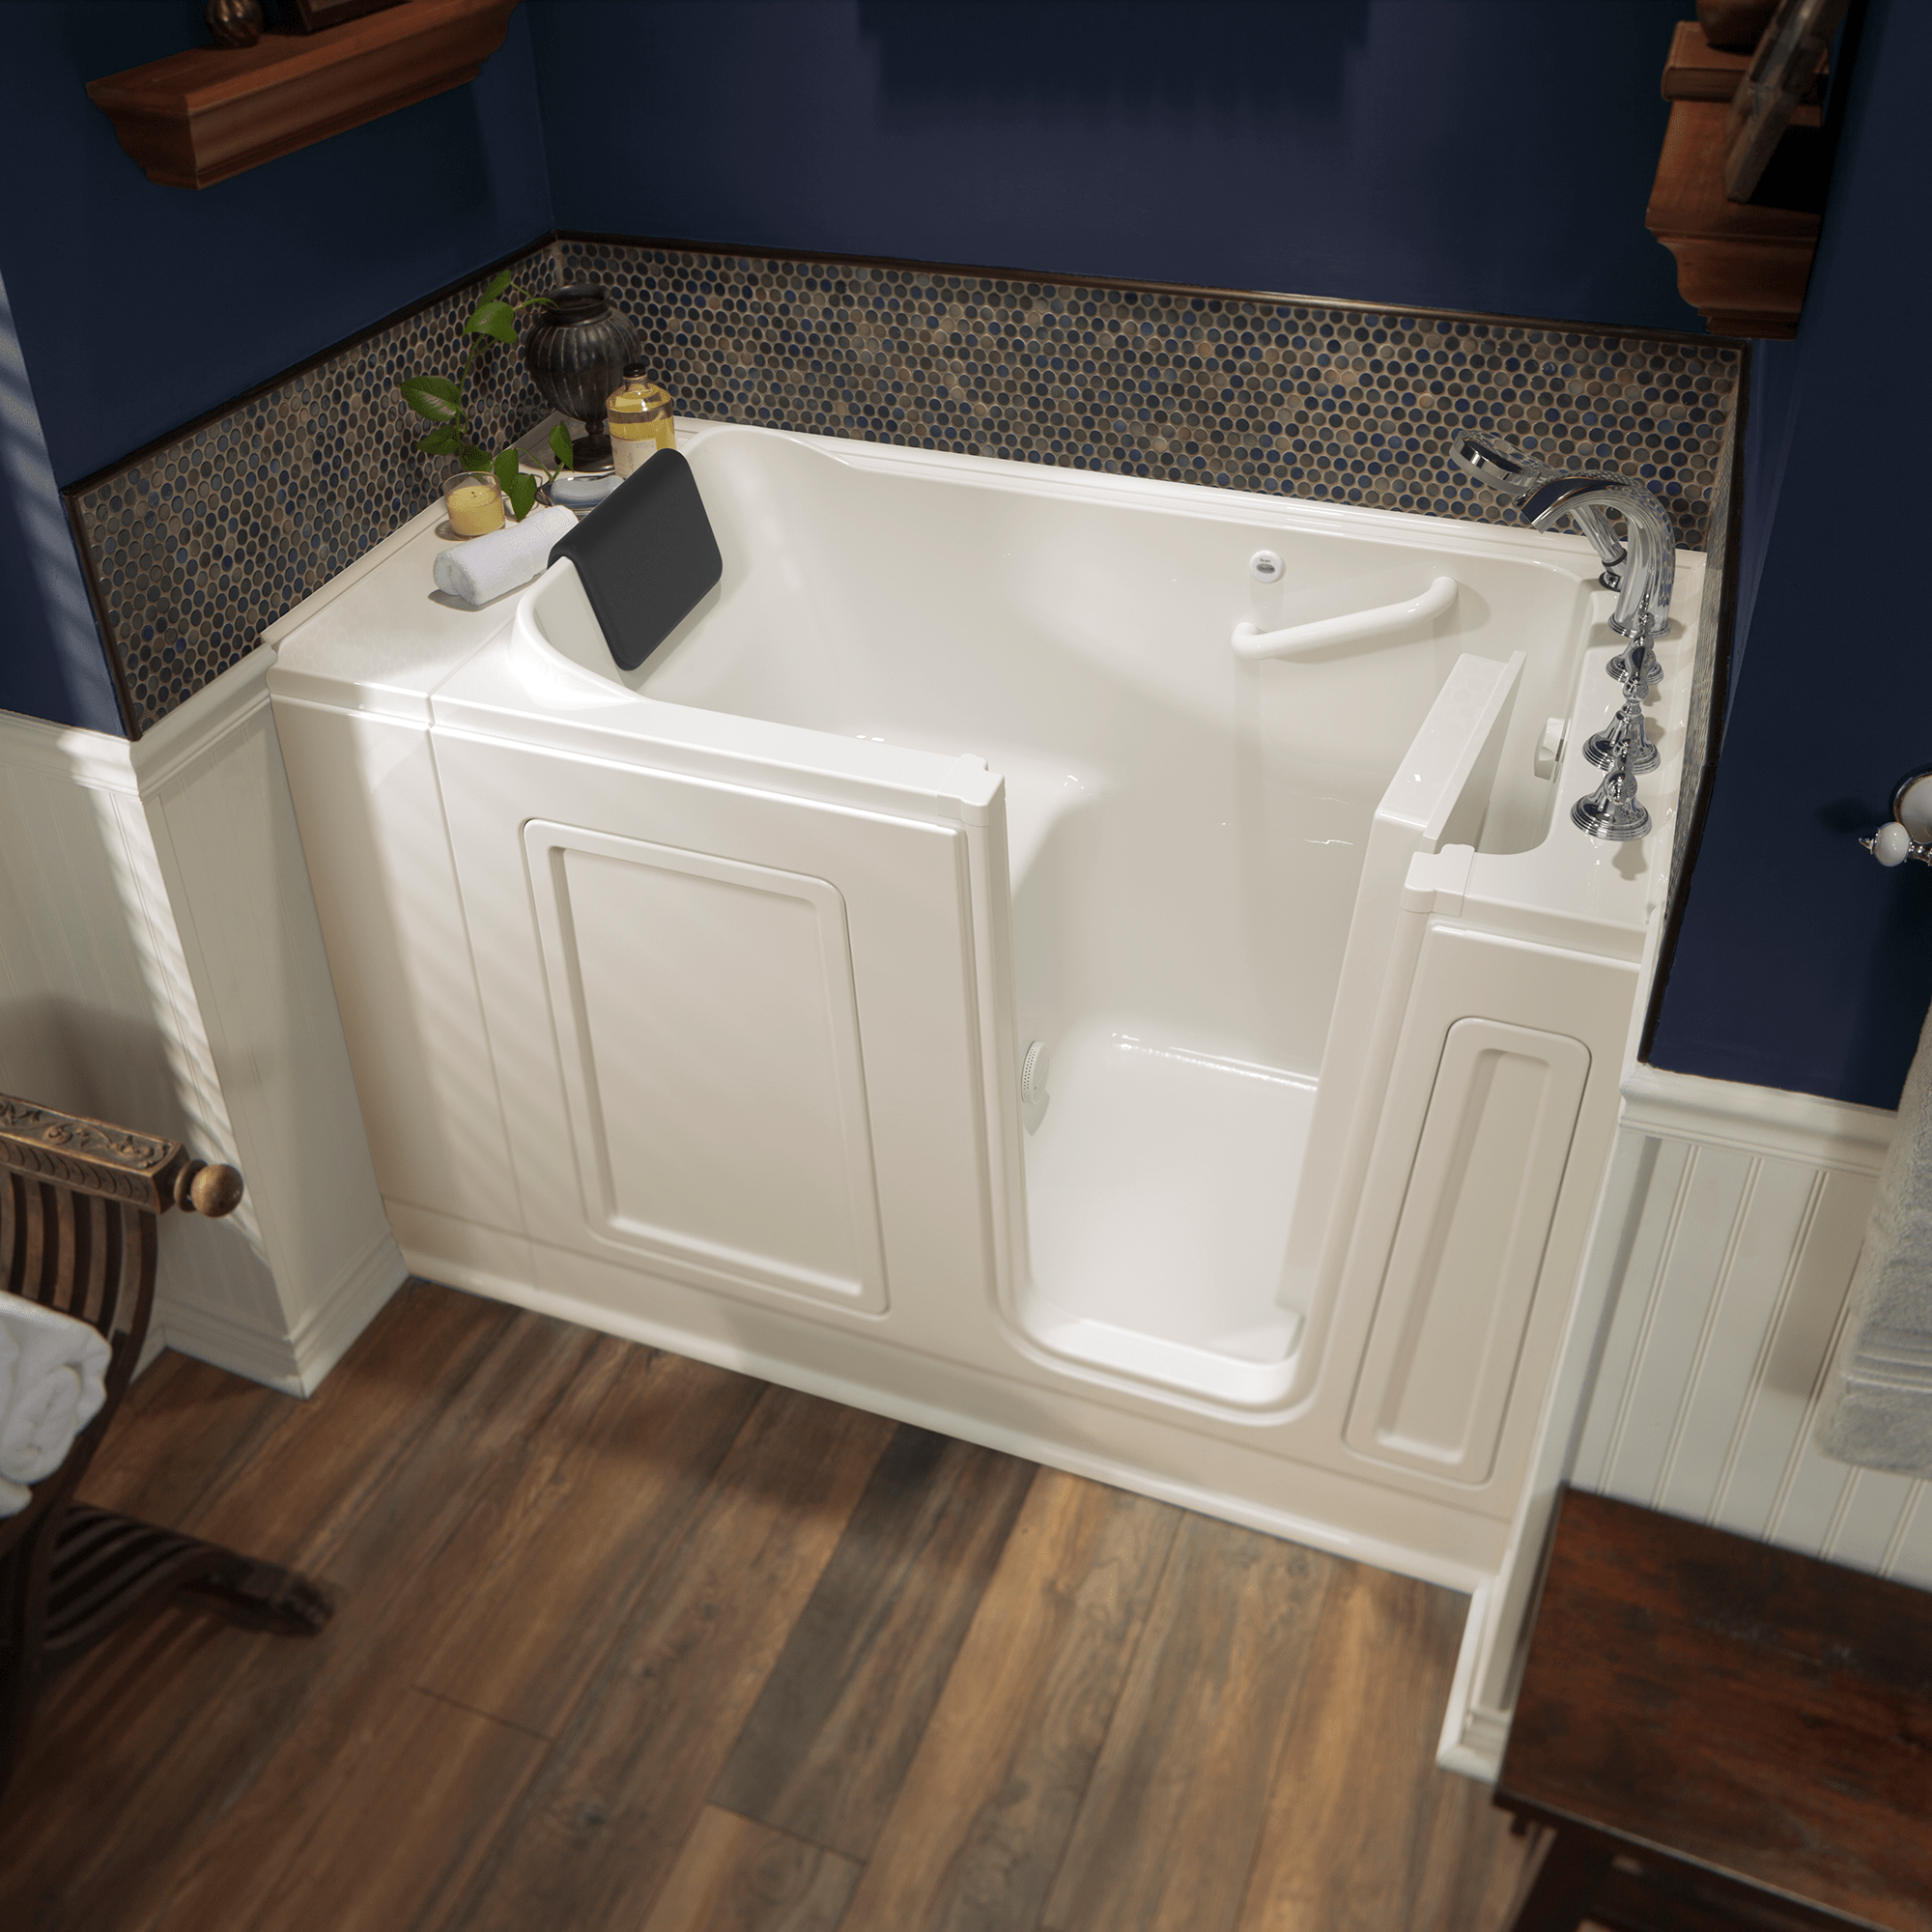 Acrylic Luxury Series 30 x 51 -Inch Walk-in Tub With Soaker System - Right-Hand Drain With Faucet